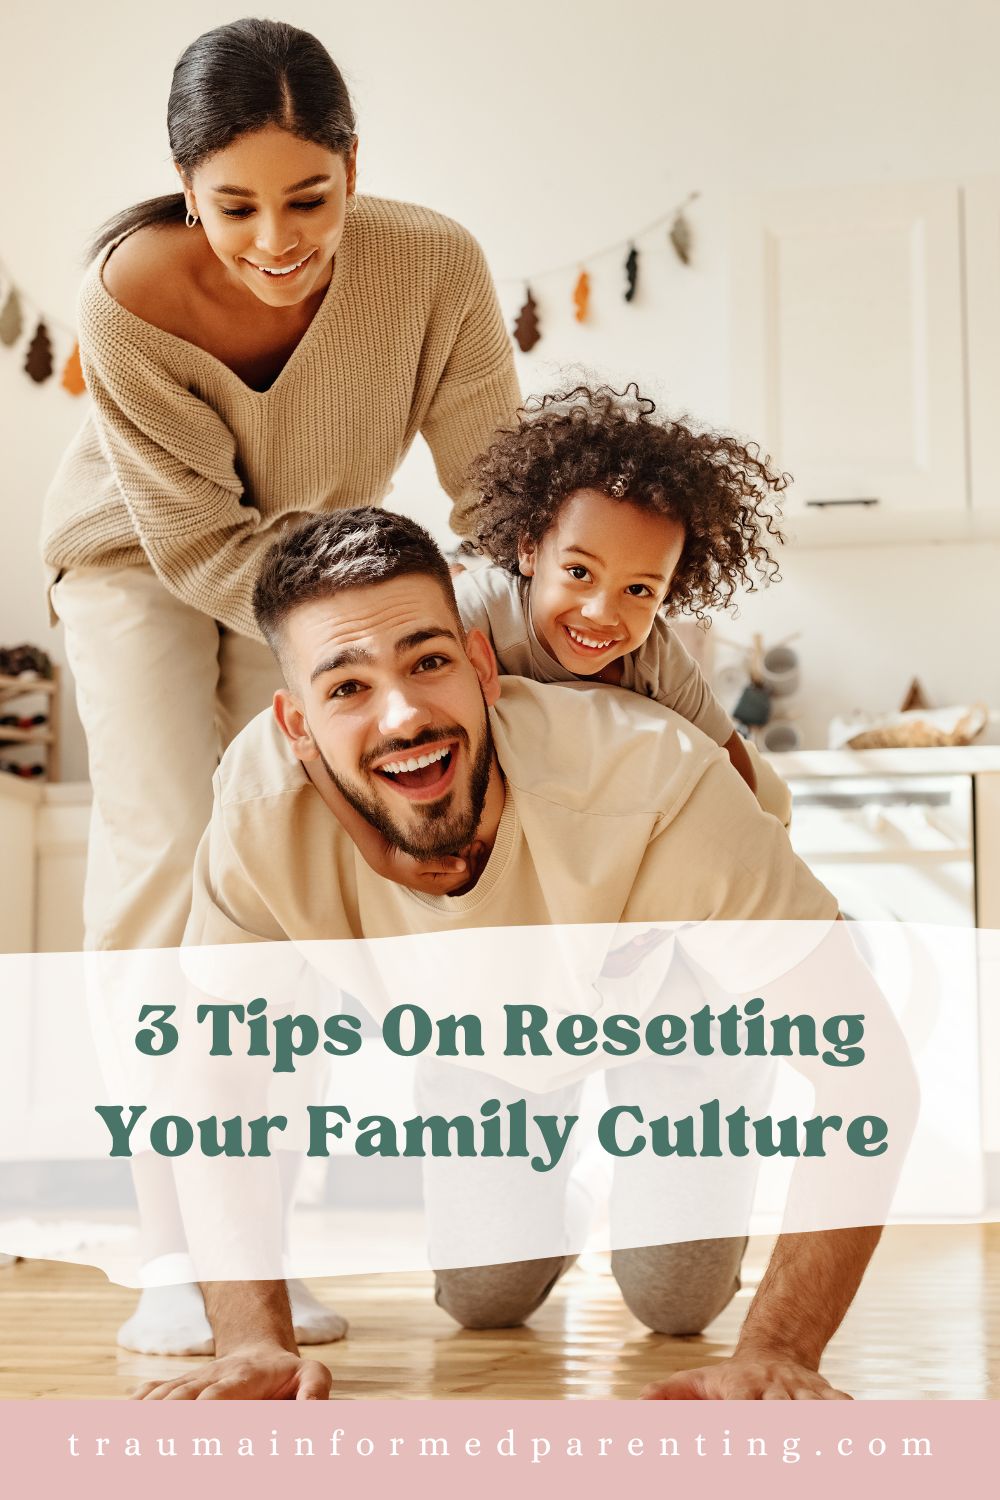 3 Tips On Resetting Your Family Culture